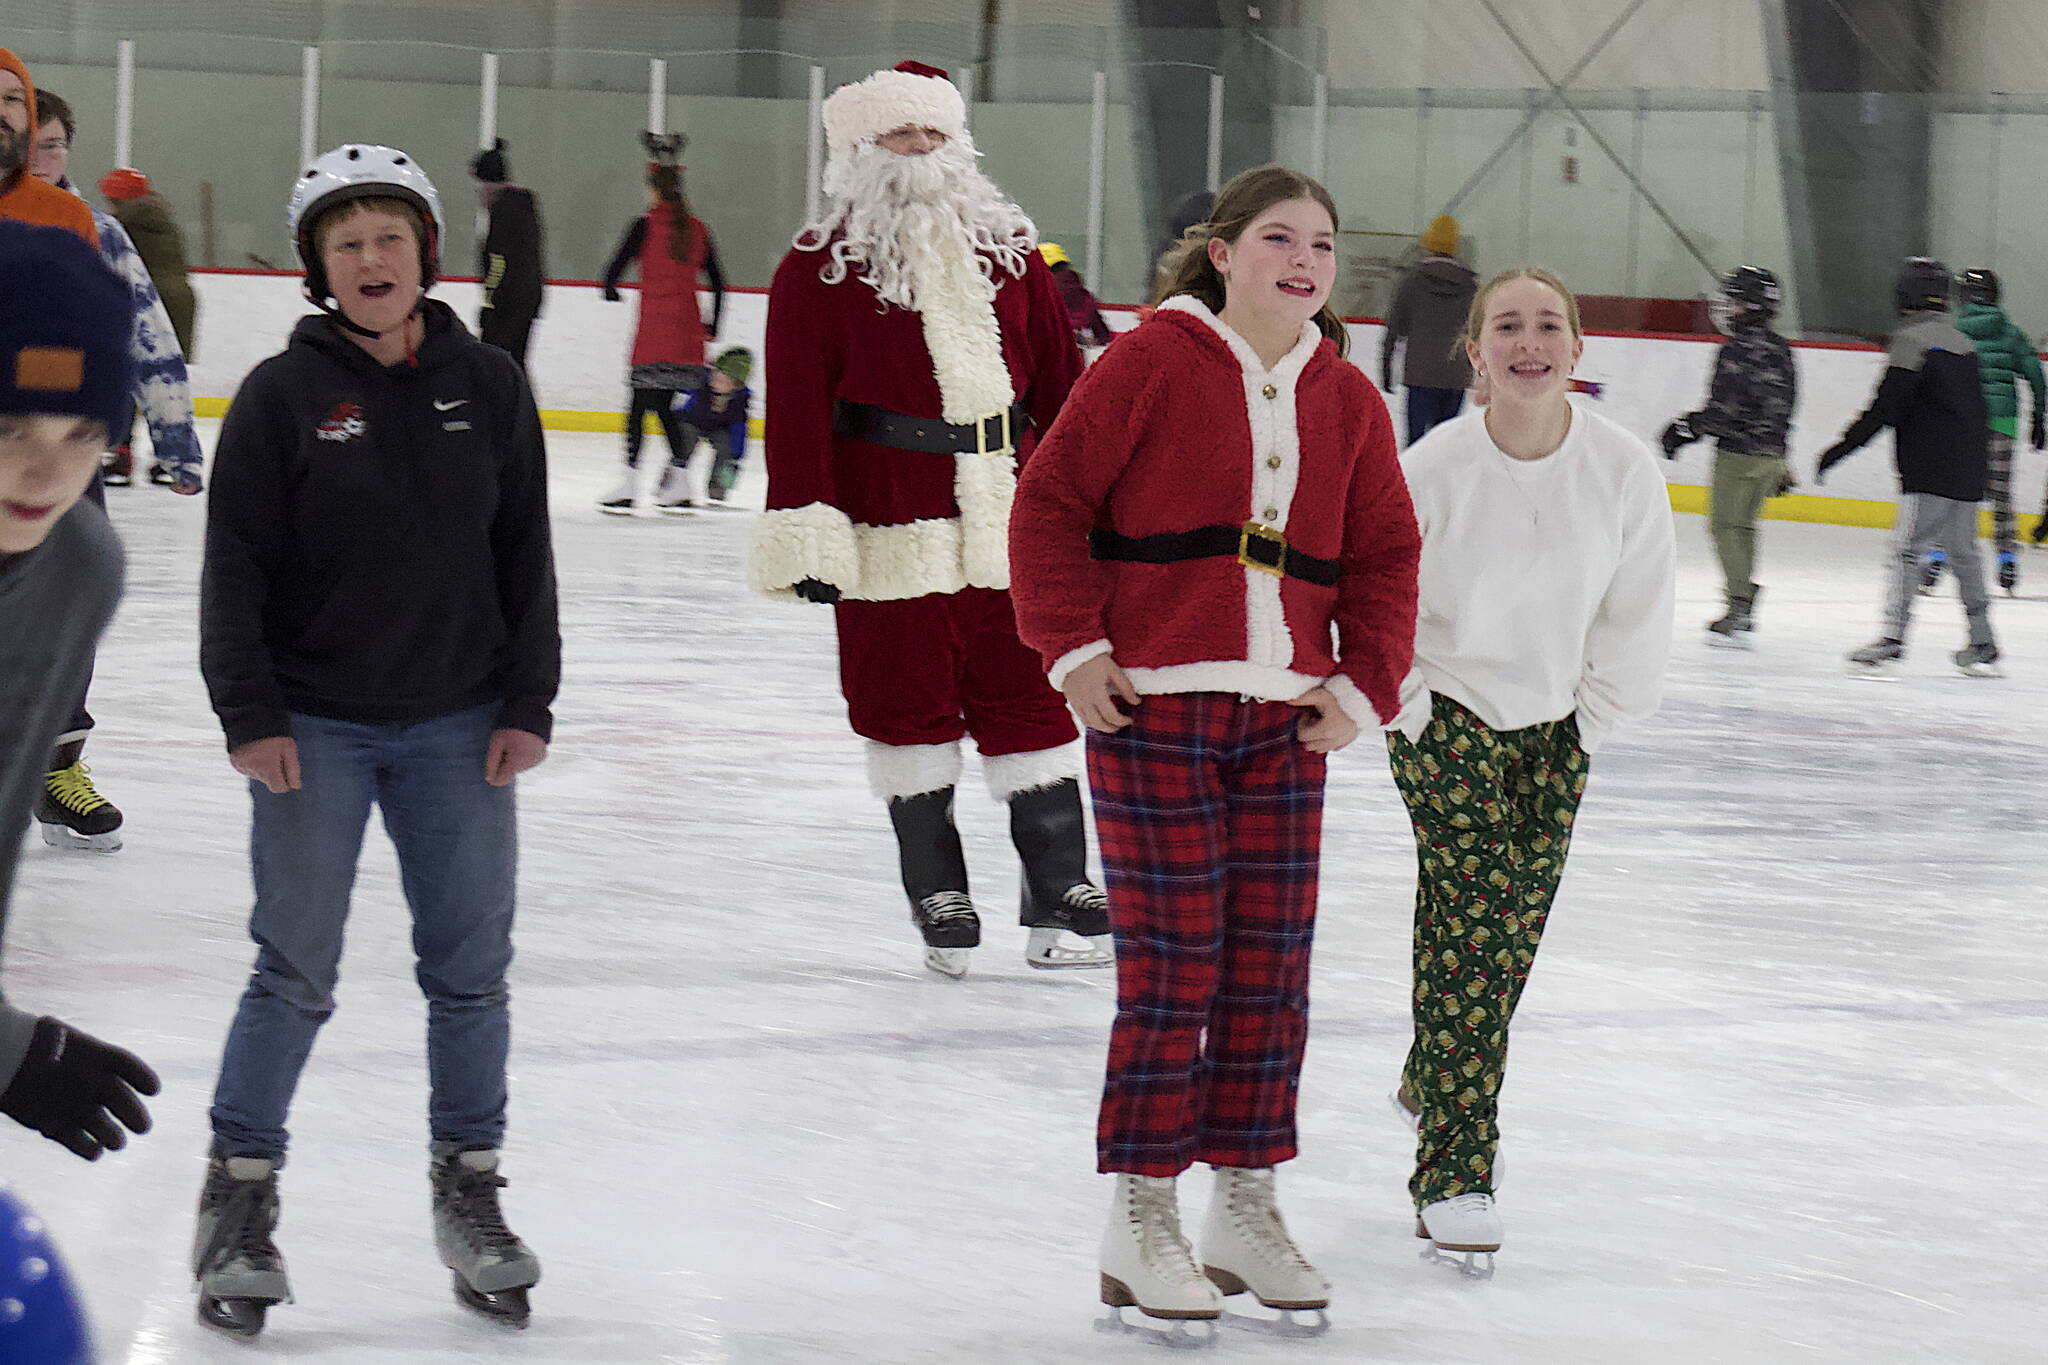 Santa joins other festively dressed skaters at Treadwell Arena on Friday night. (Mark Sabbatini / Juneau Empire)